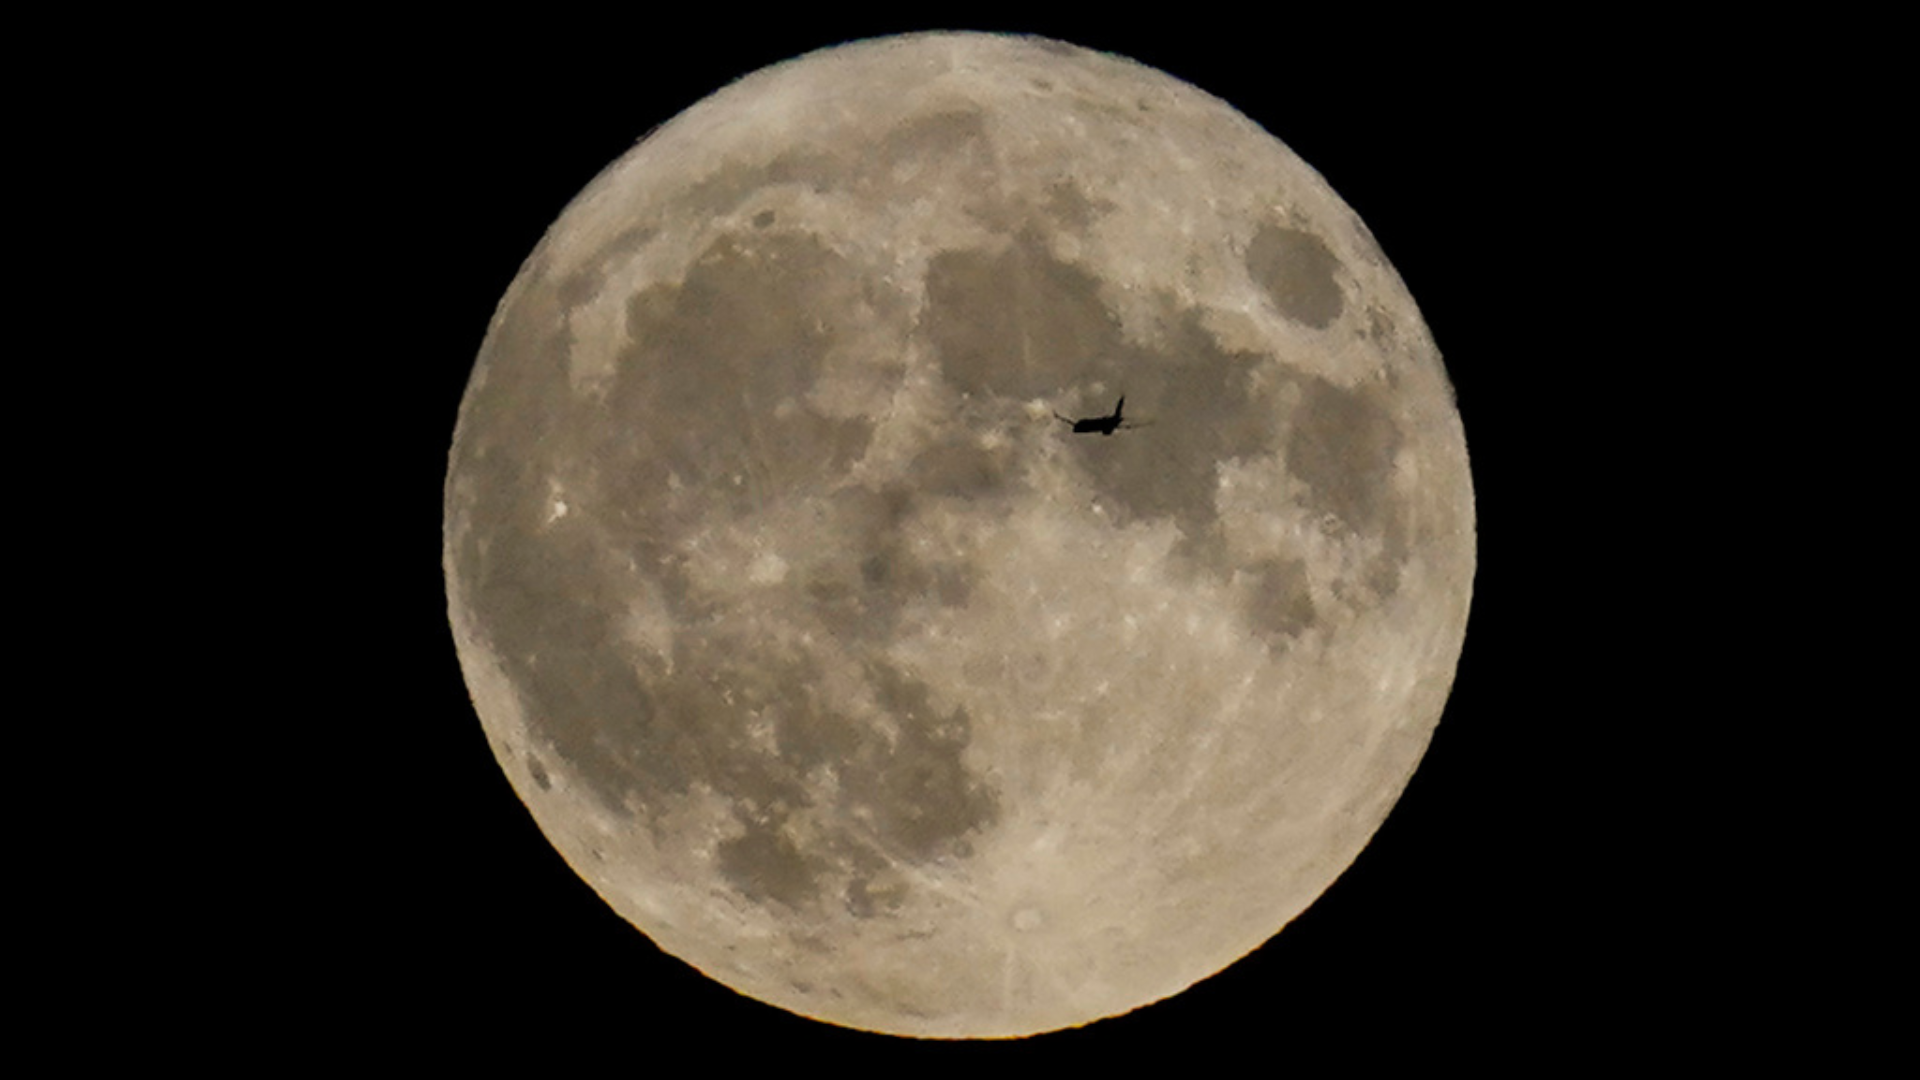 A plane passes in front of the moon.